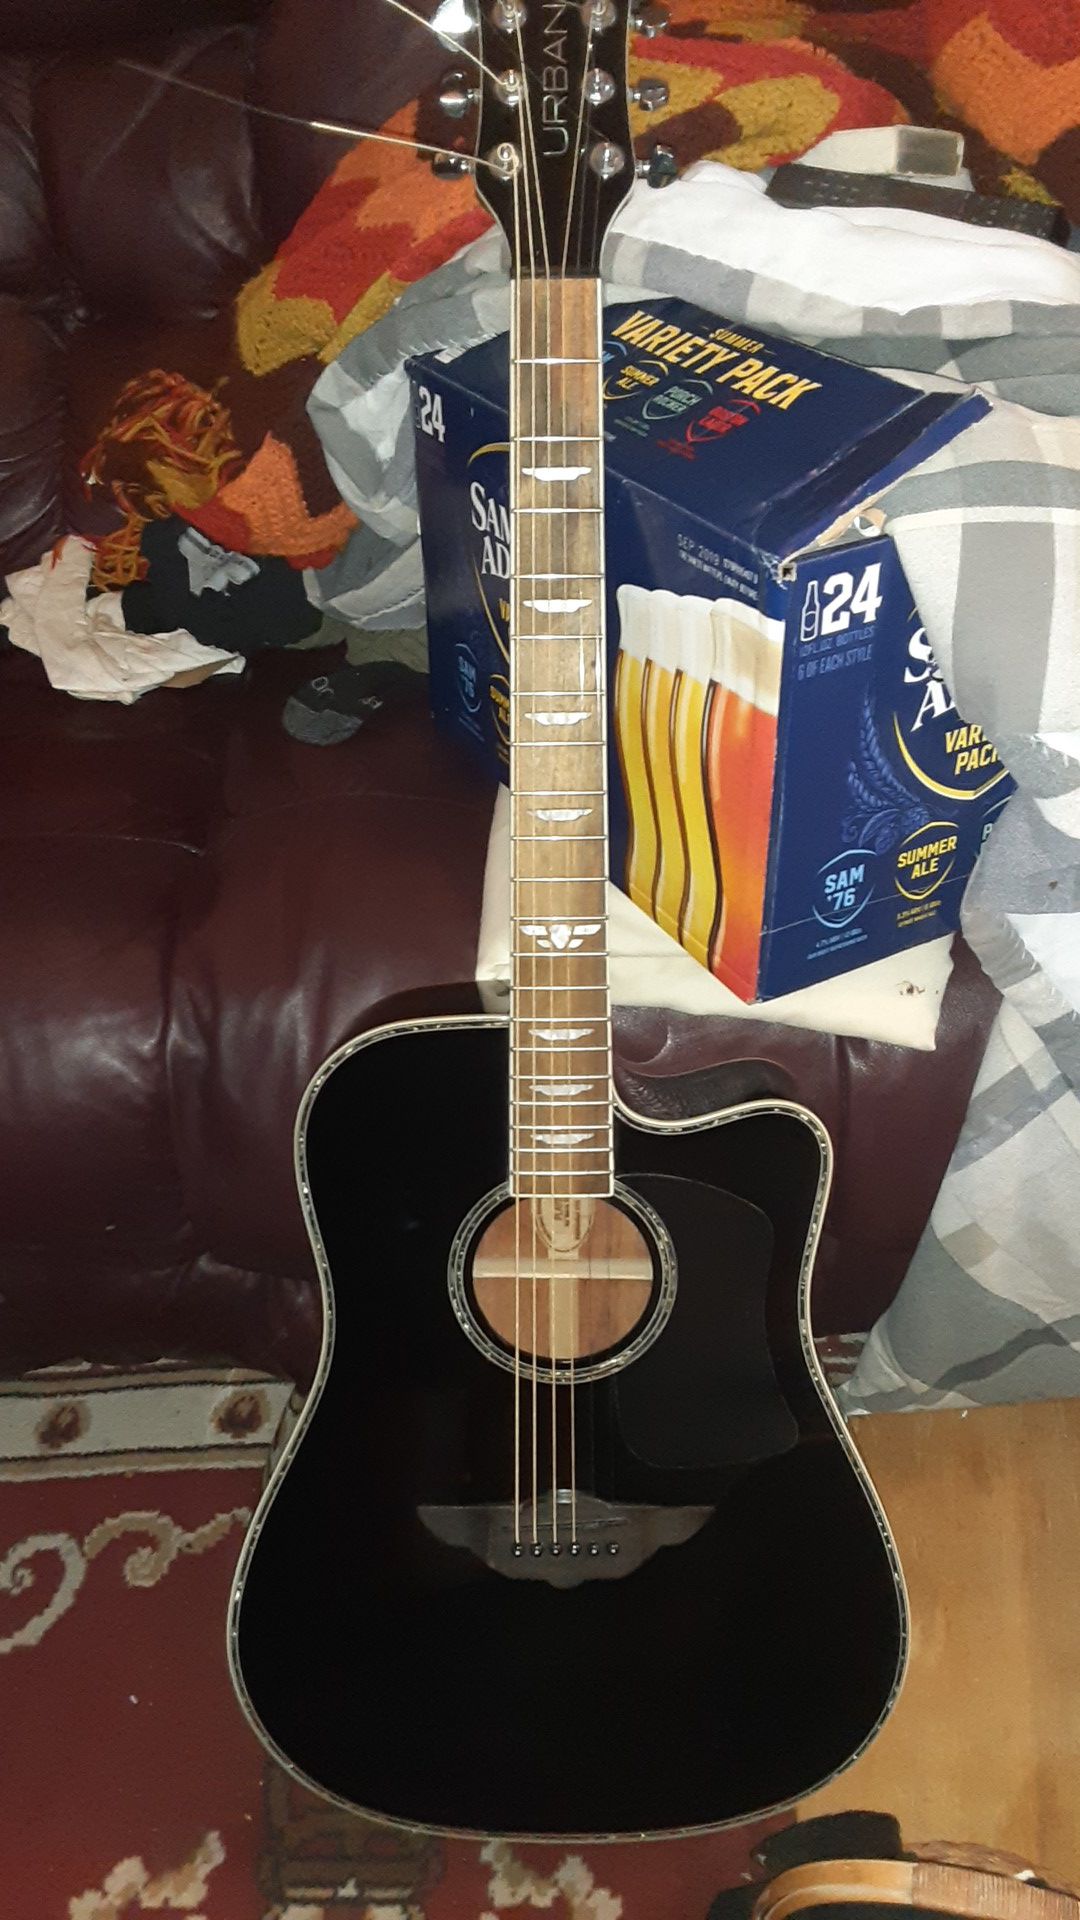 Player by Keith urban acoustic guitar